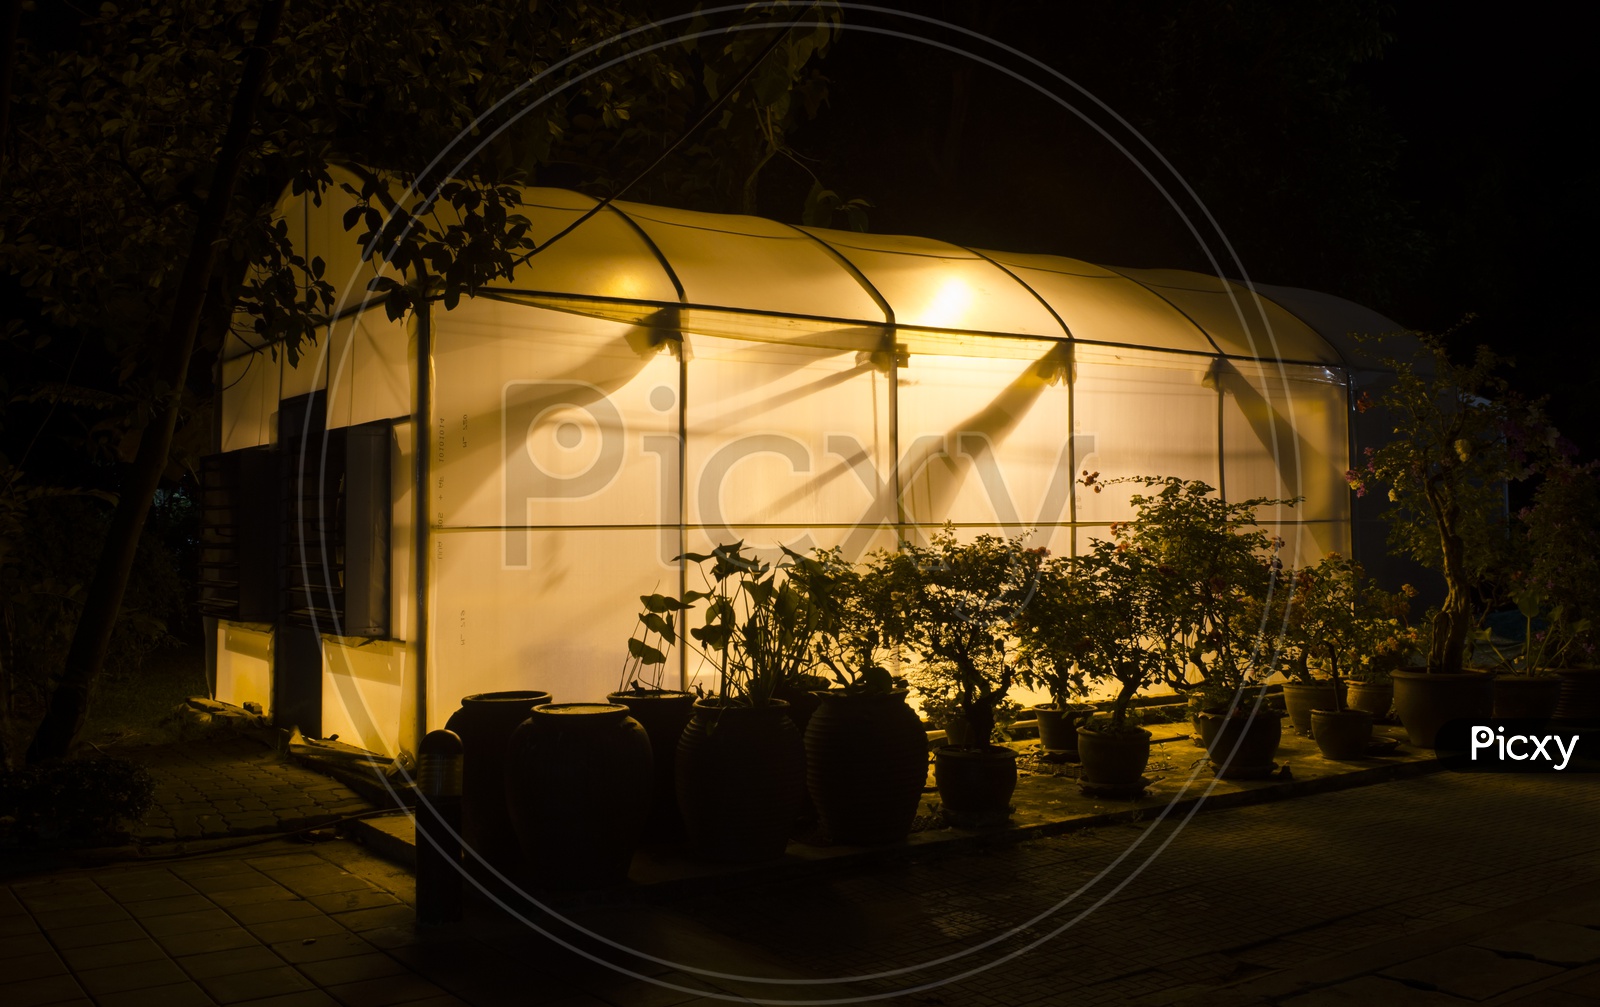 A research greenhouse at university campus of Thailand